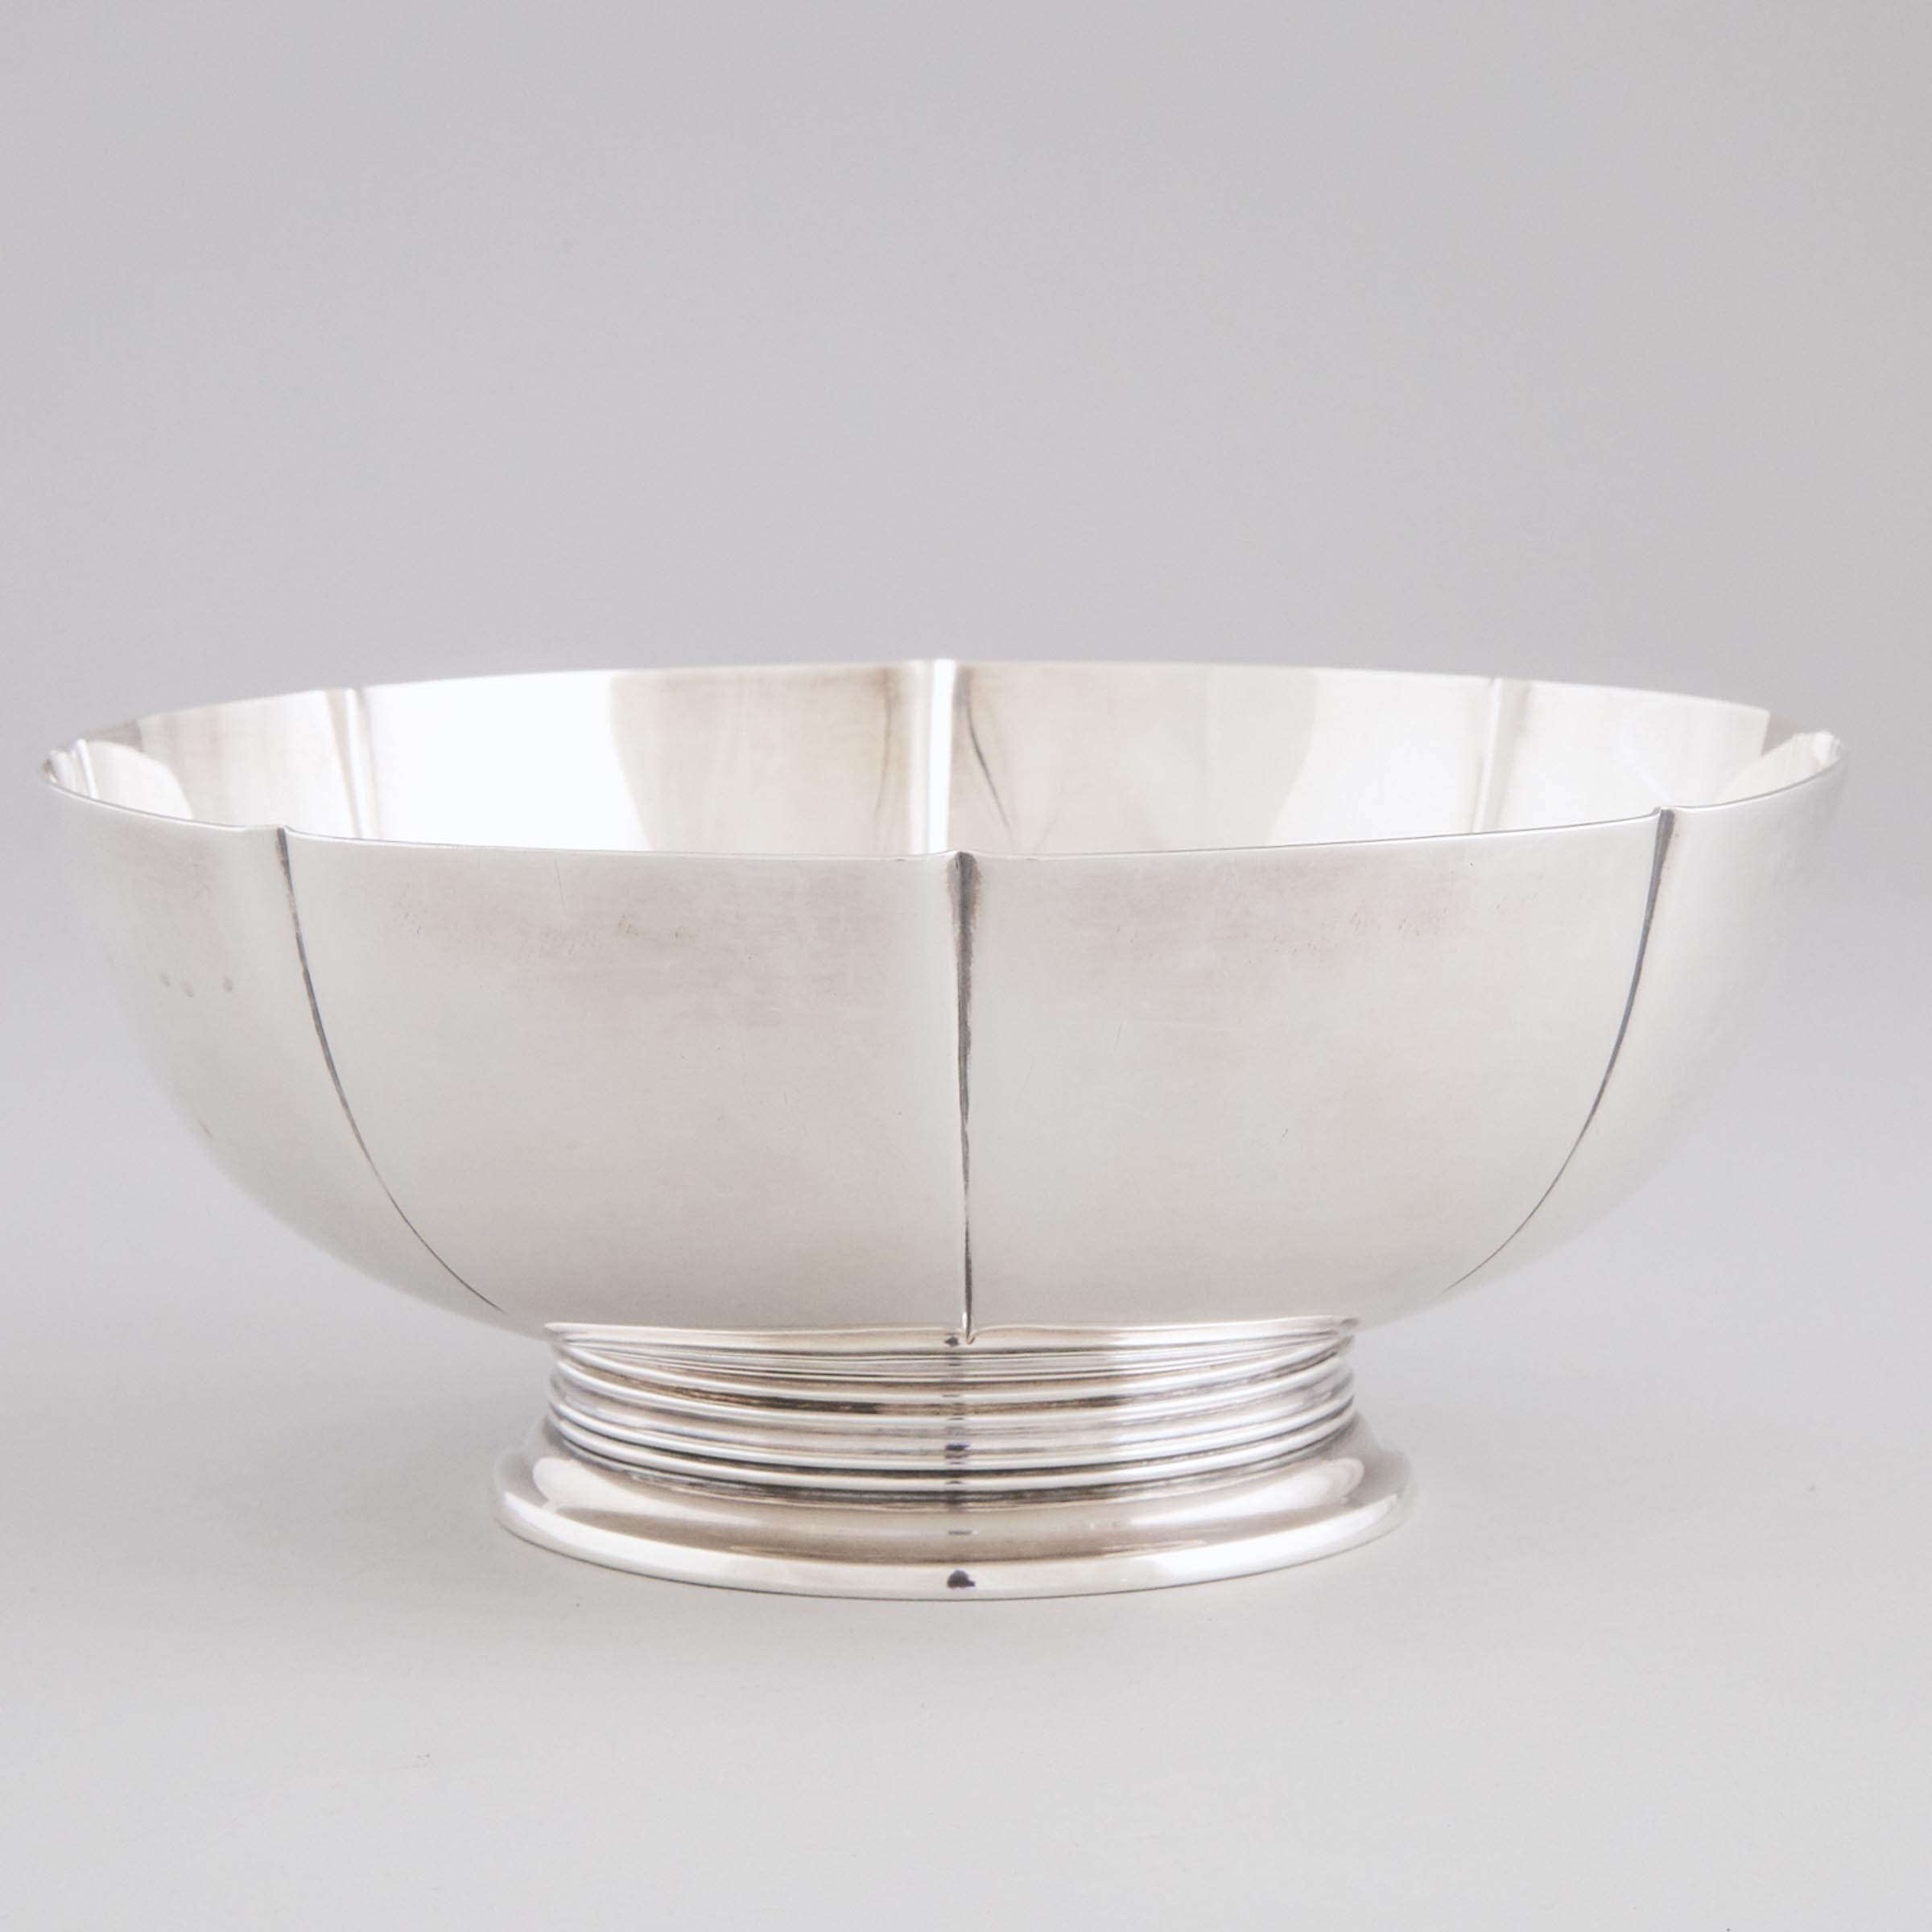 American Silver Footed Bowl, Charter Co., Wallingford, Ct., 20th century